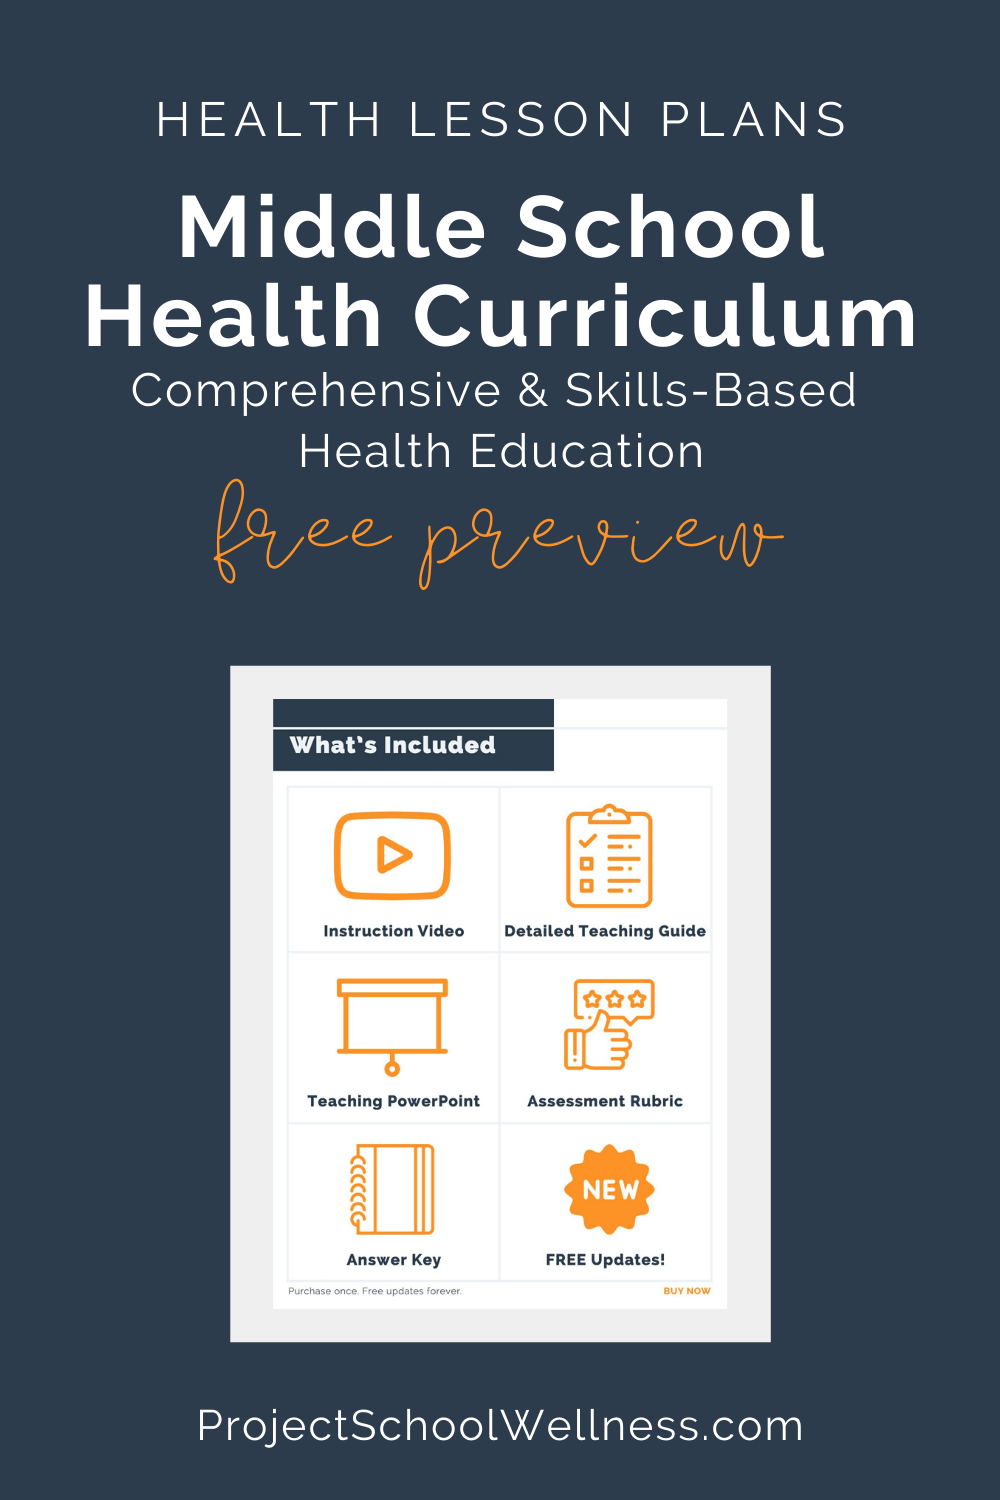 Download five FREE LESSON PLANS! Use this comprehensive and skills-based middle school health curriculum to teach students how to create a healthy life. This is a complete health education middle school program and comes with hundreds of health lesson plans requiring no extra planning and minimal prep. Includes health education posters, health education lessons, mental health lesson plan ideas, SEL activities for kids, health lessons for middle schools, and health worksheets.